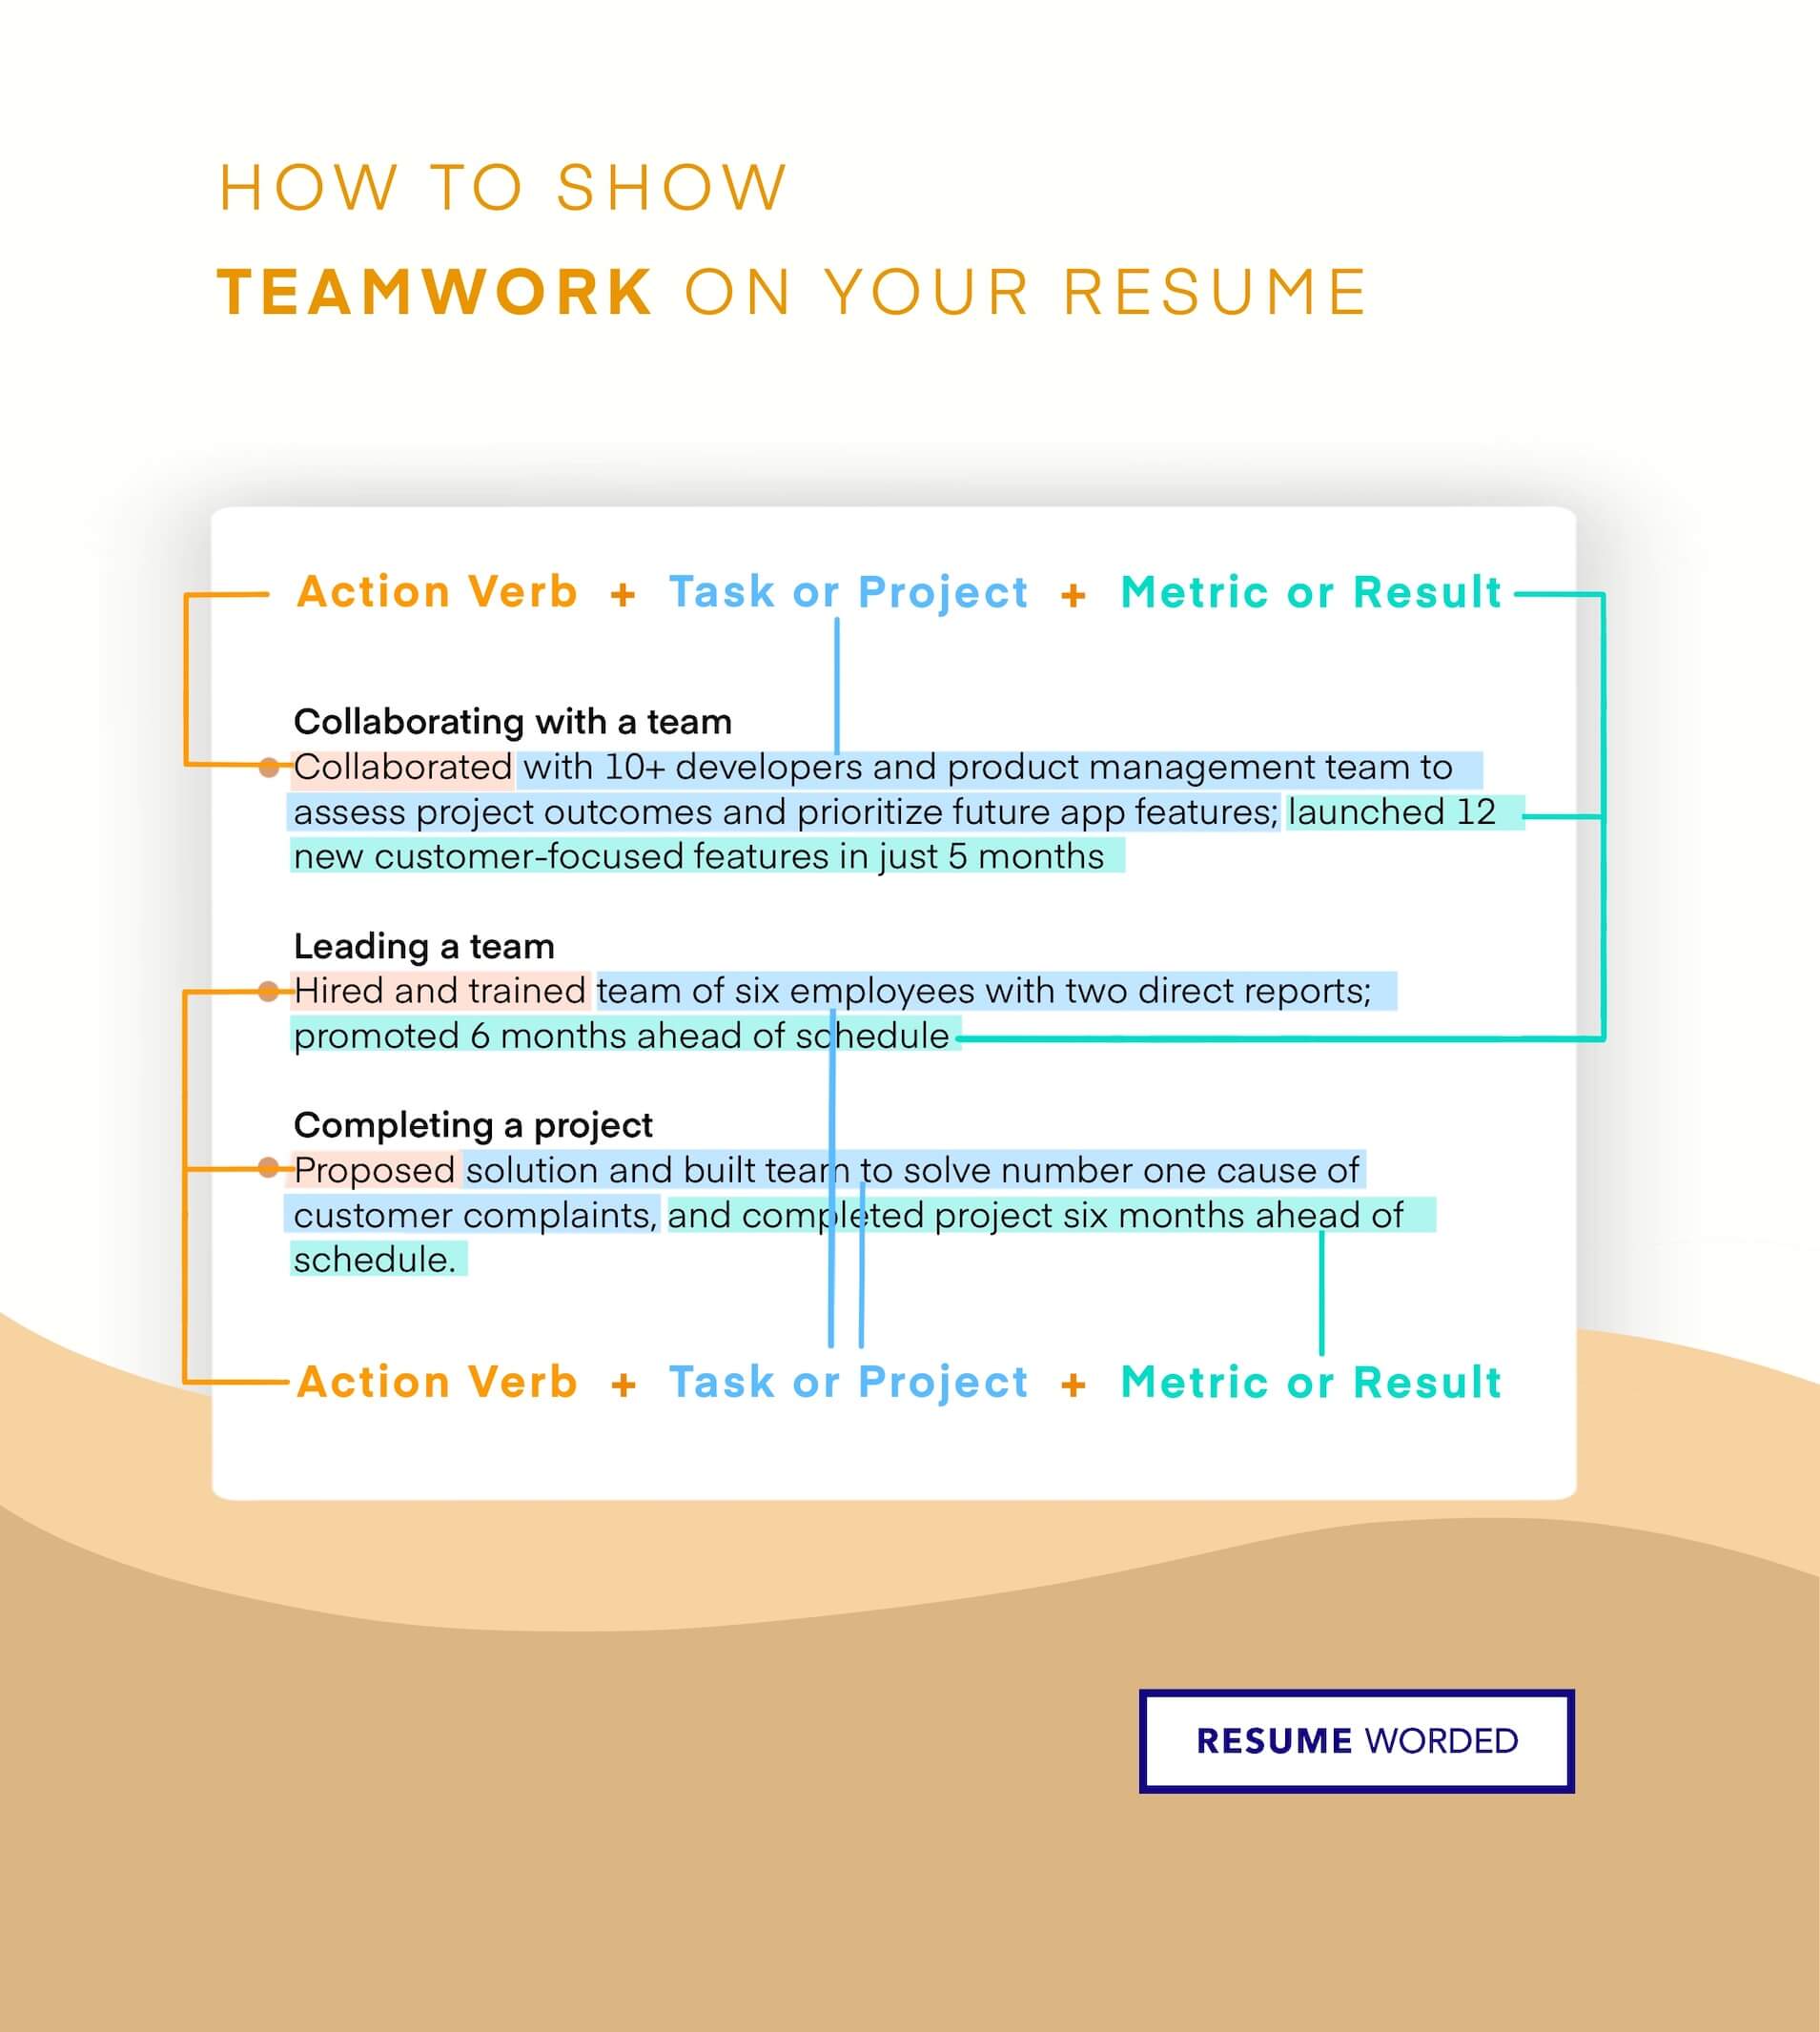 Show off your teamwork skills - Construction Project Manager CV